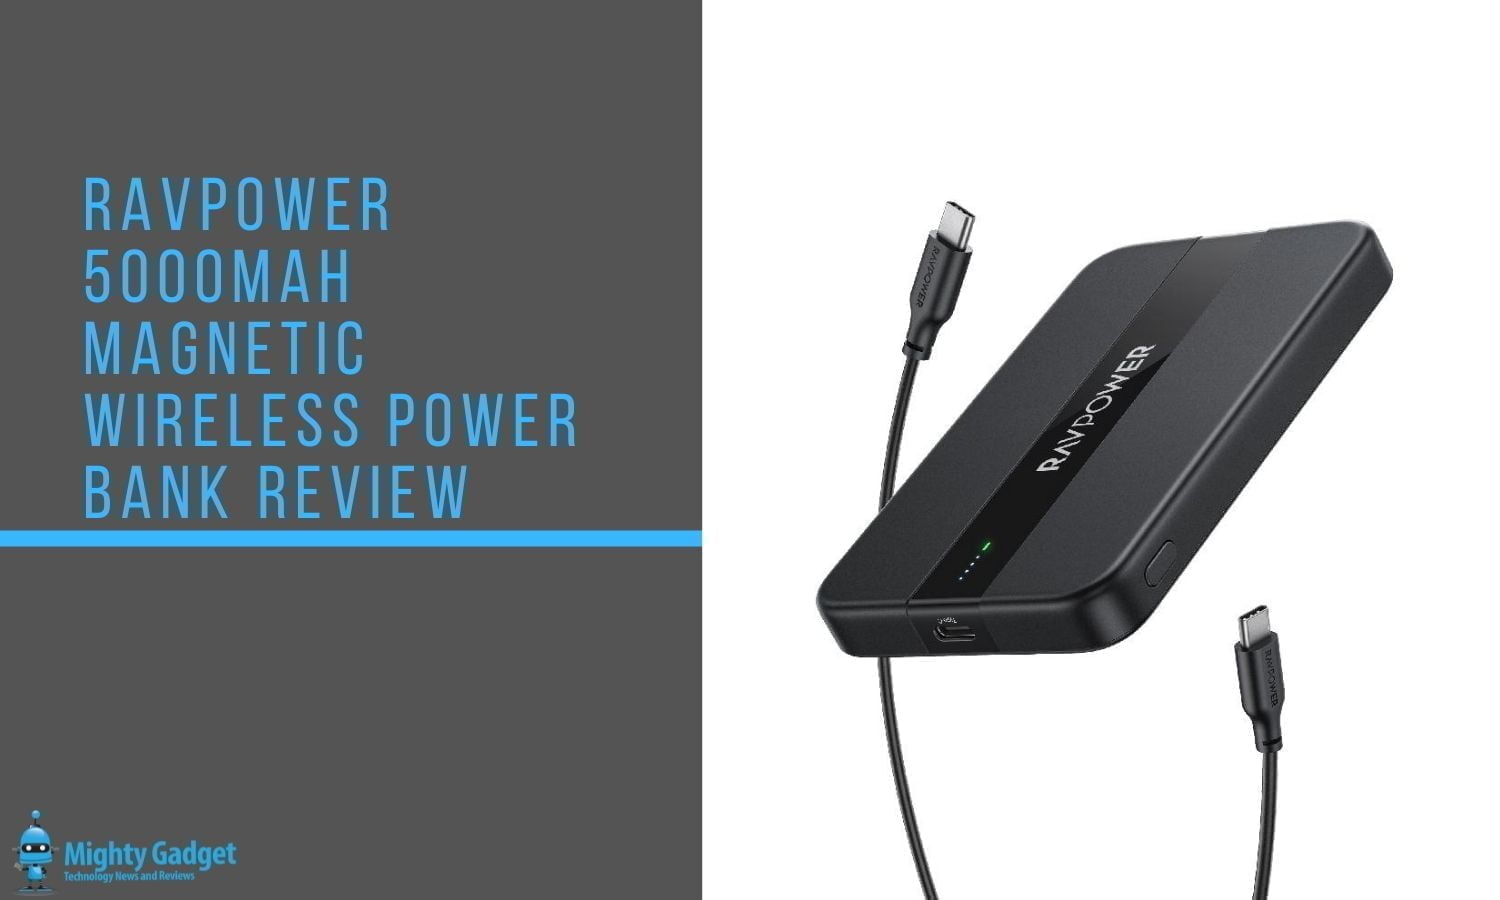 RAVPower 5000mAh 7.5 Magnetic Wireless Power Bank Review – Apple MagSafe Battery Pack Alternative